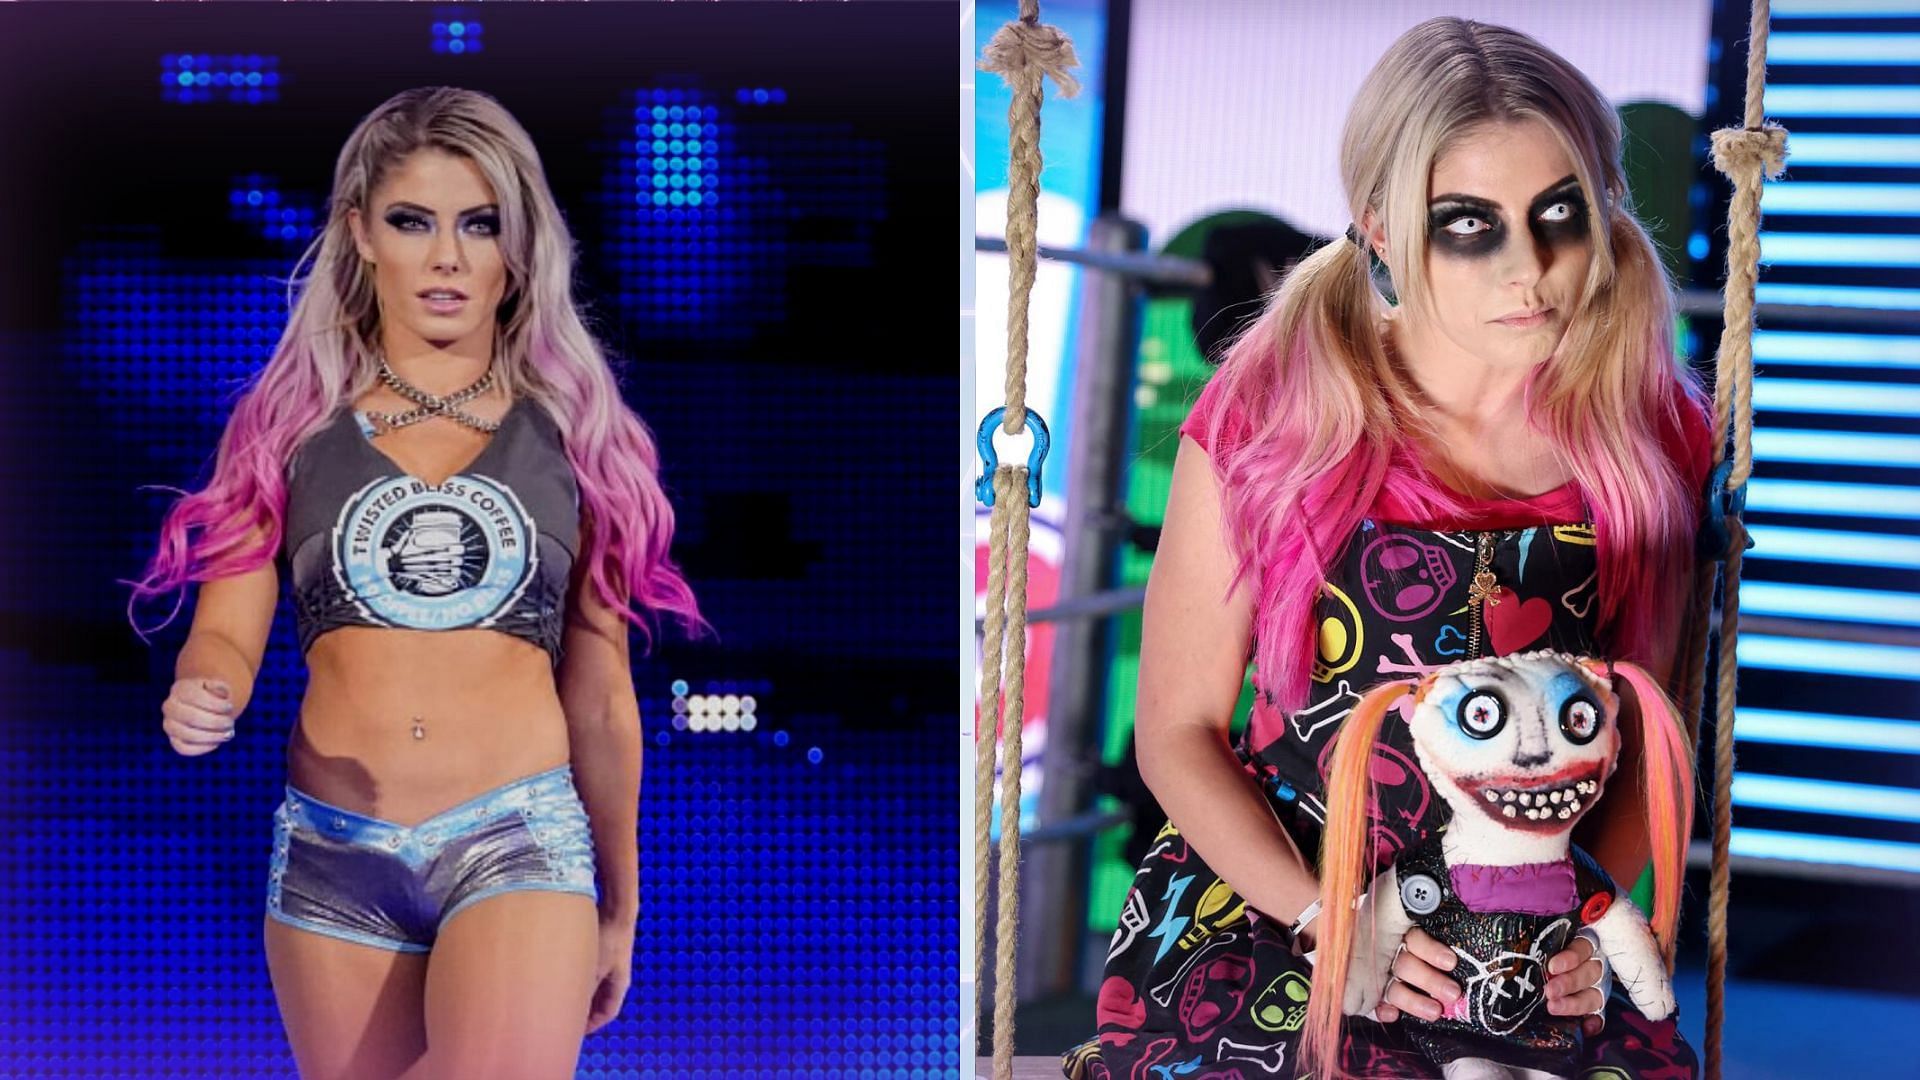 WWE Superstar Alexa Bliss is likely heading to the dark side again.